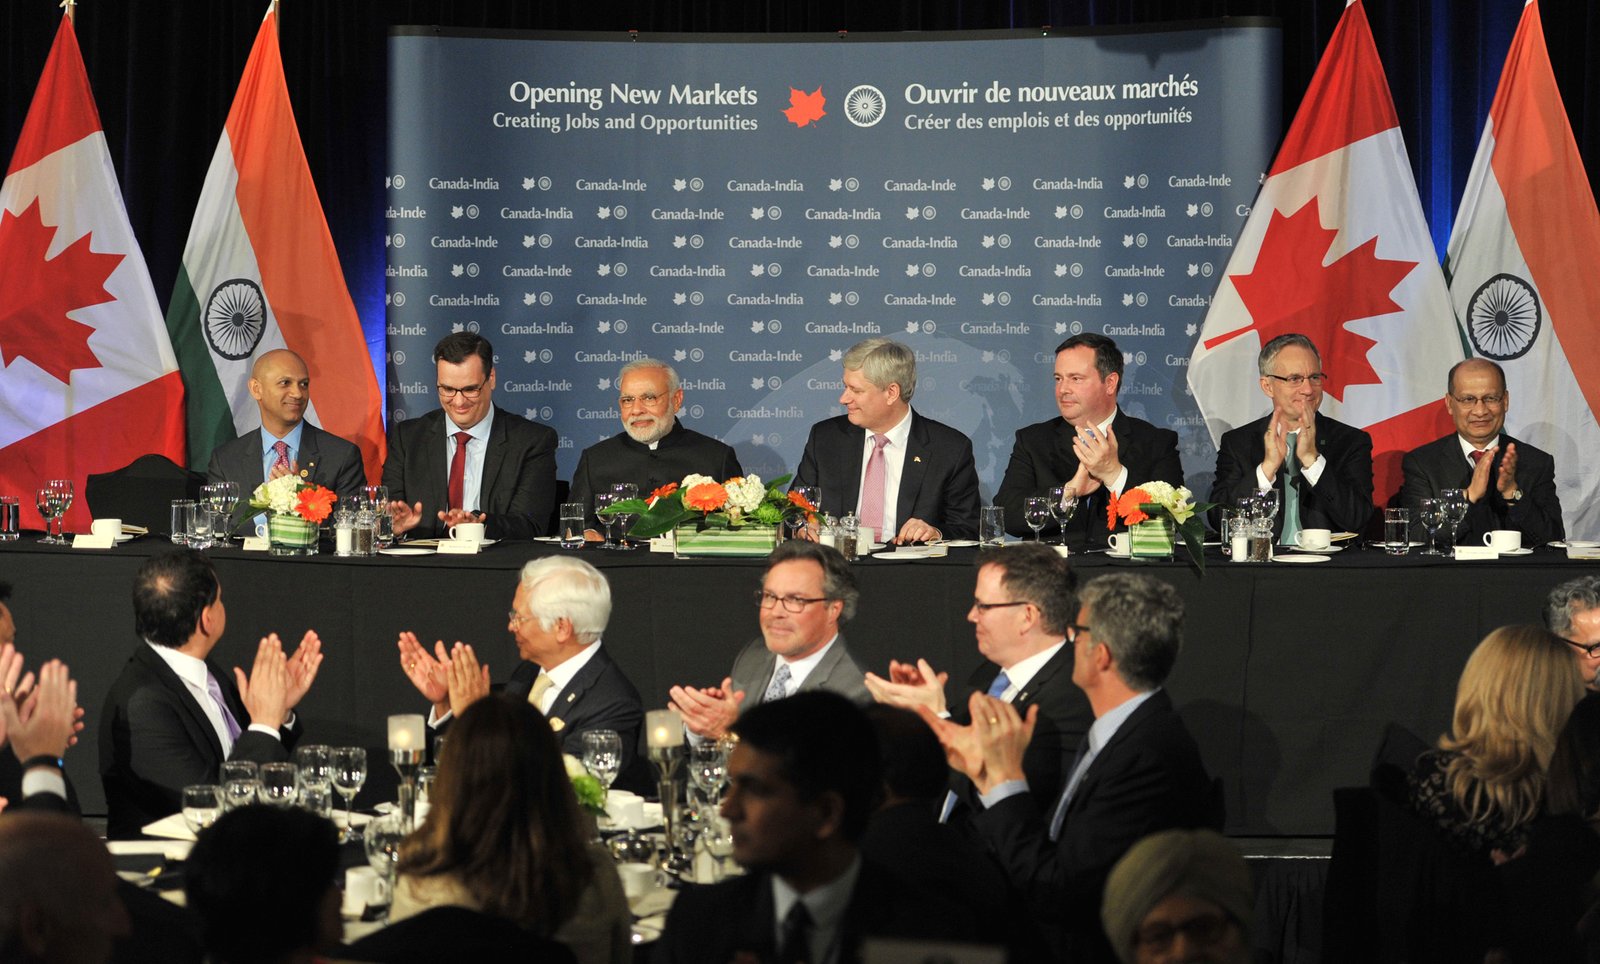 The Prime Minister, Mr Narendra Modi at the official dinner hosted by the Prime Minister of Canada, Mr Stephen Harper in Vancouver, Canada on April 16, 2015